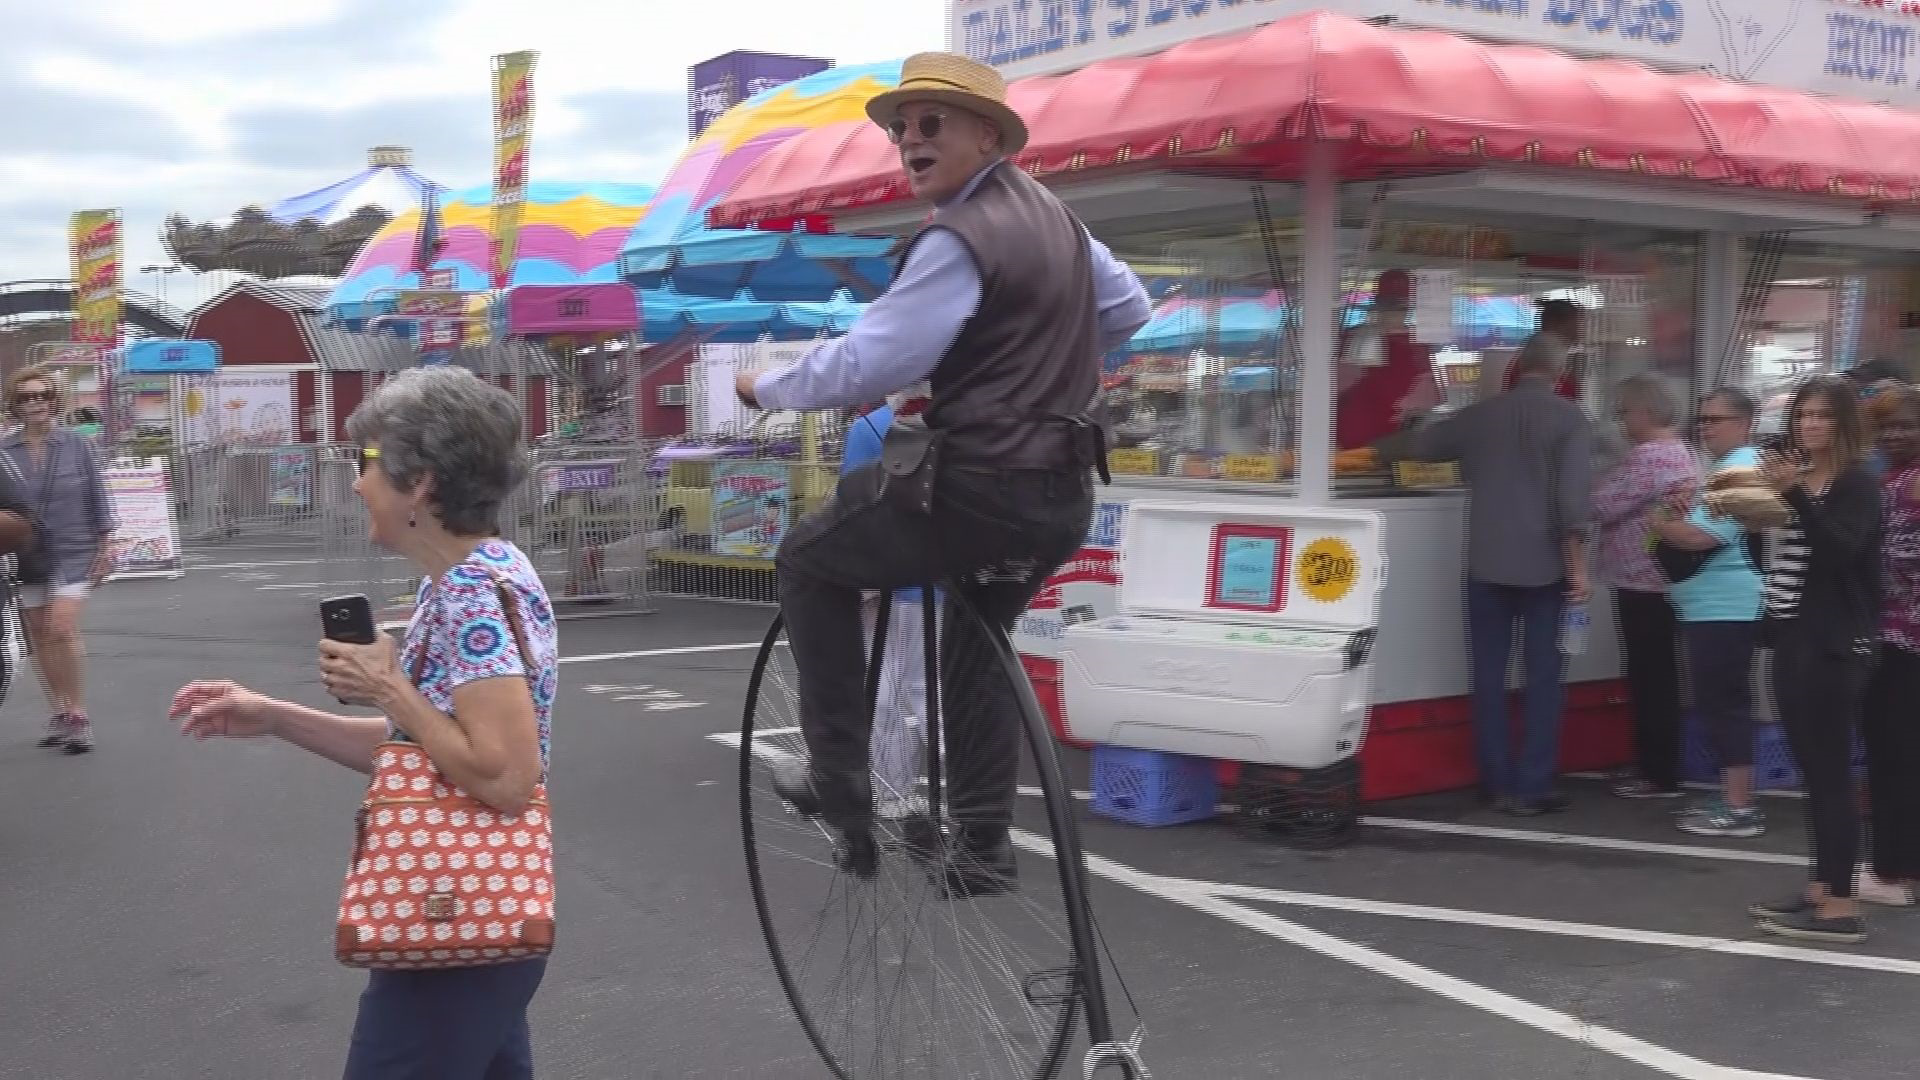 Mr. Dennis rides the old-fashioned penny-farthing bike, a device that came from England to the U.s. in 1869.